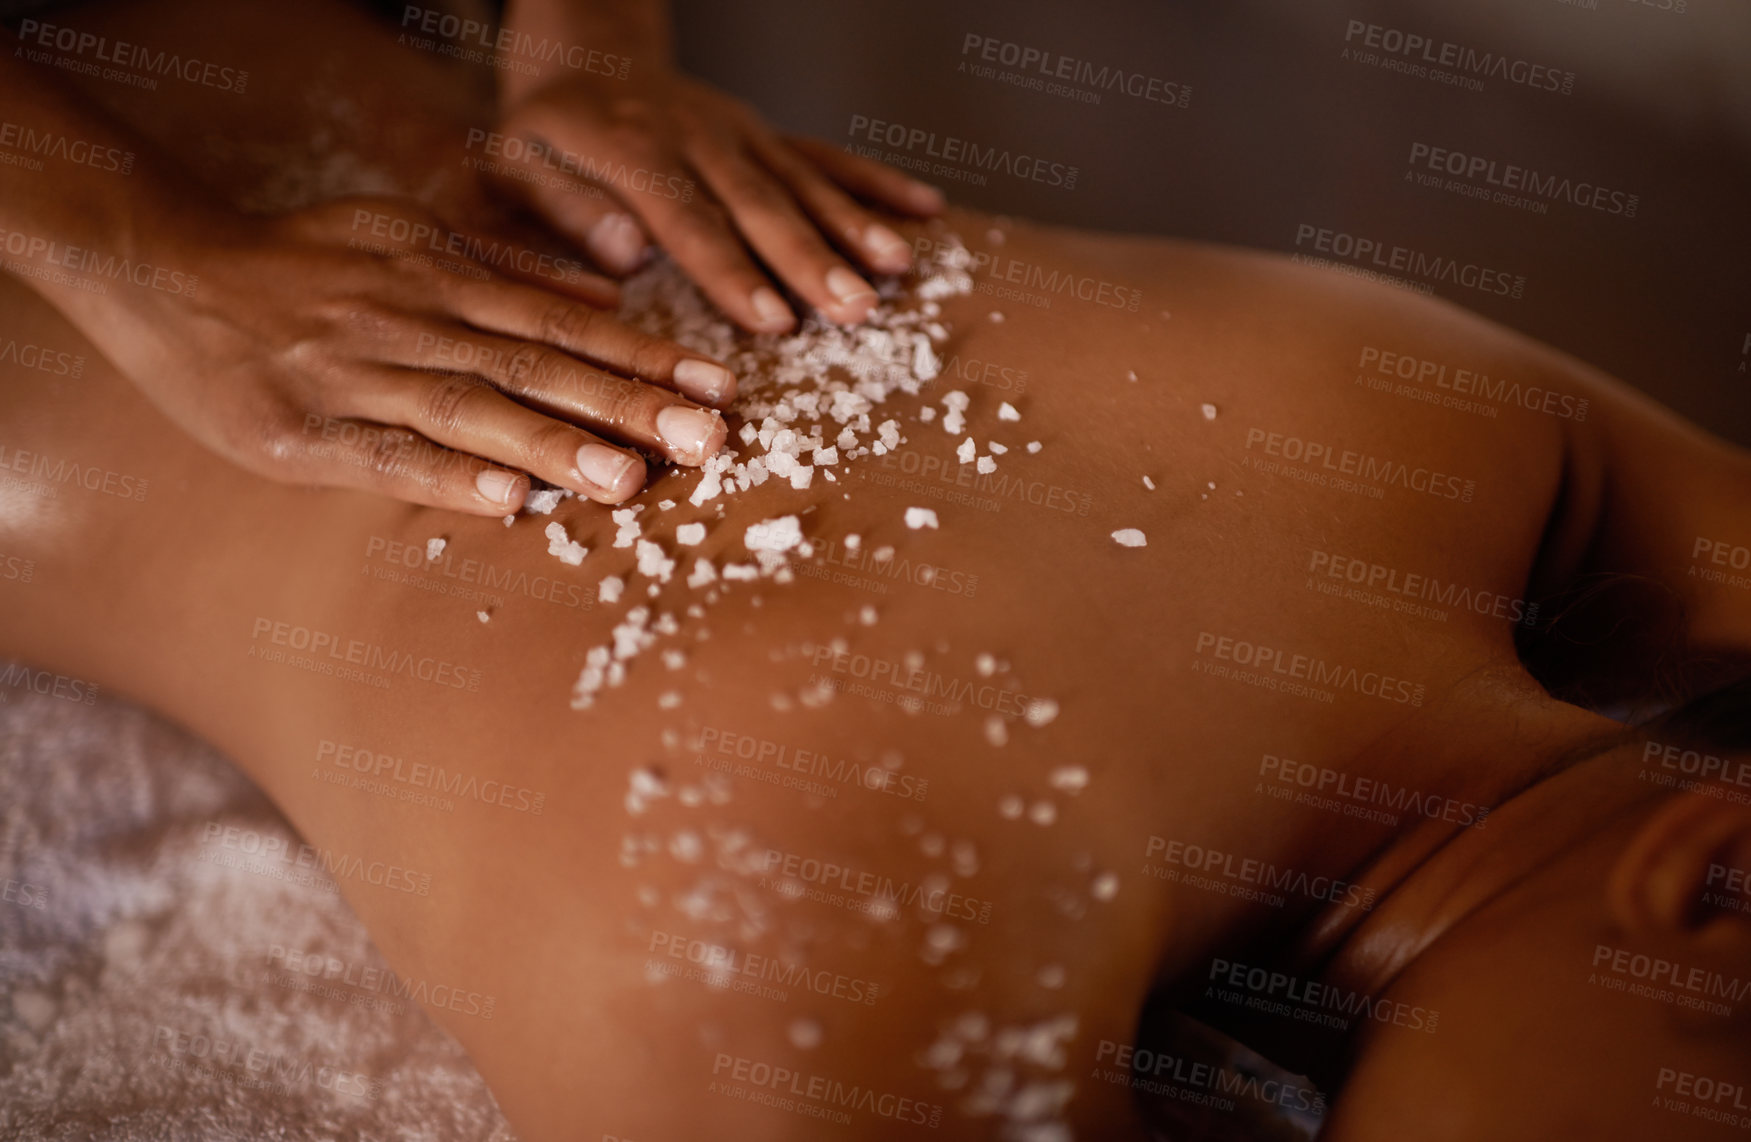 Buy stock photo Salt, spa scrub and beauty therapist hands with woman customer at a hotel with massage. Exfoliate therapy, luxury and relax treatment of a female person back for skincare and wellness exfoliation